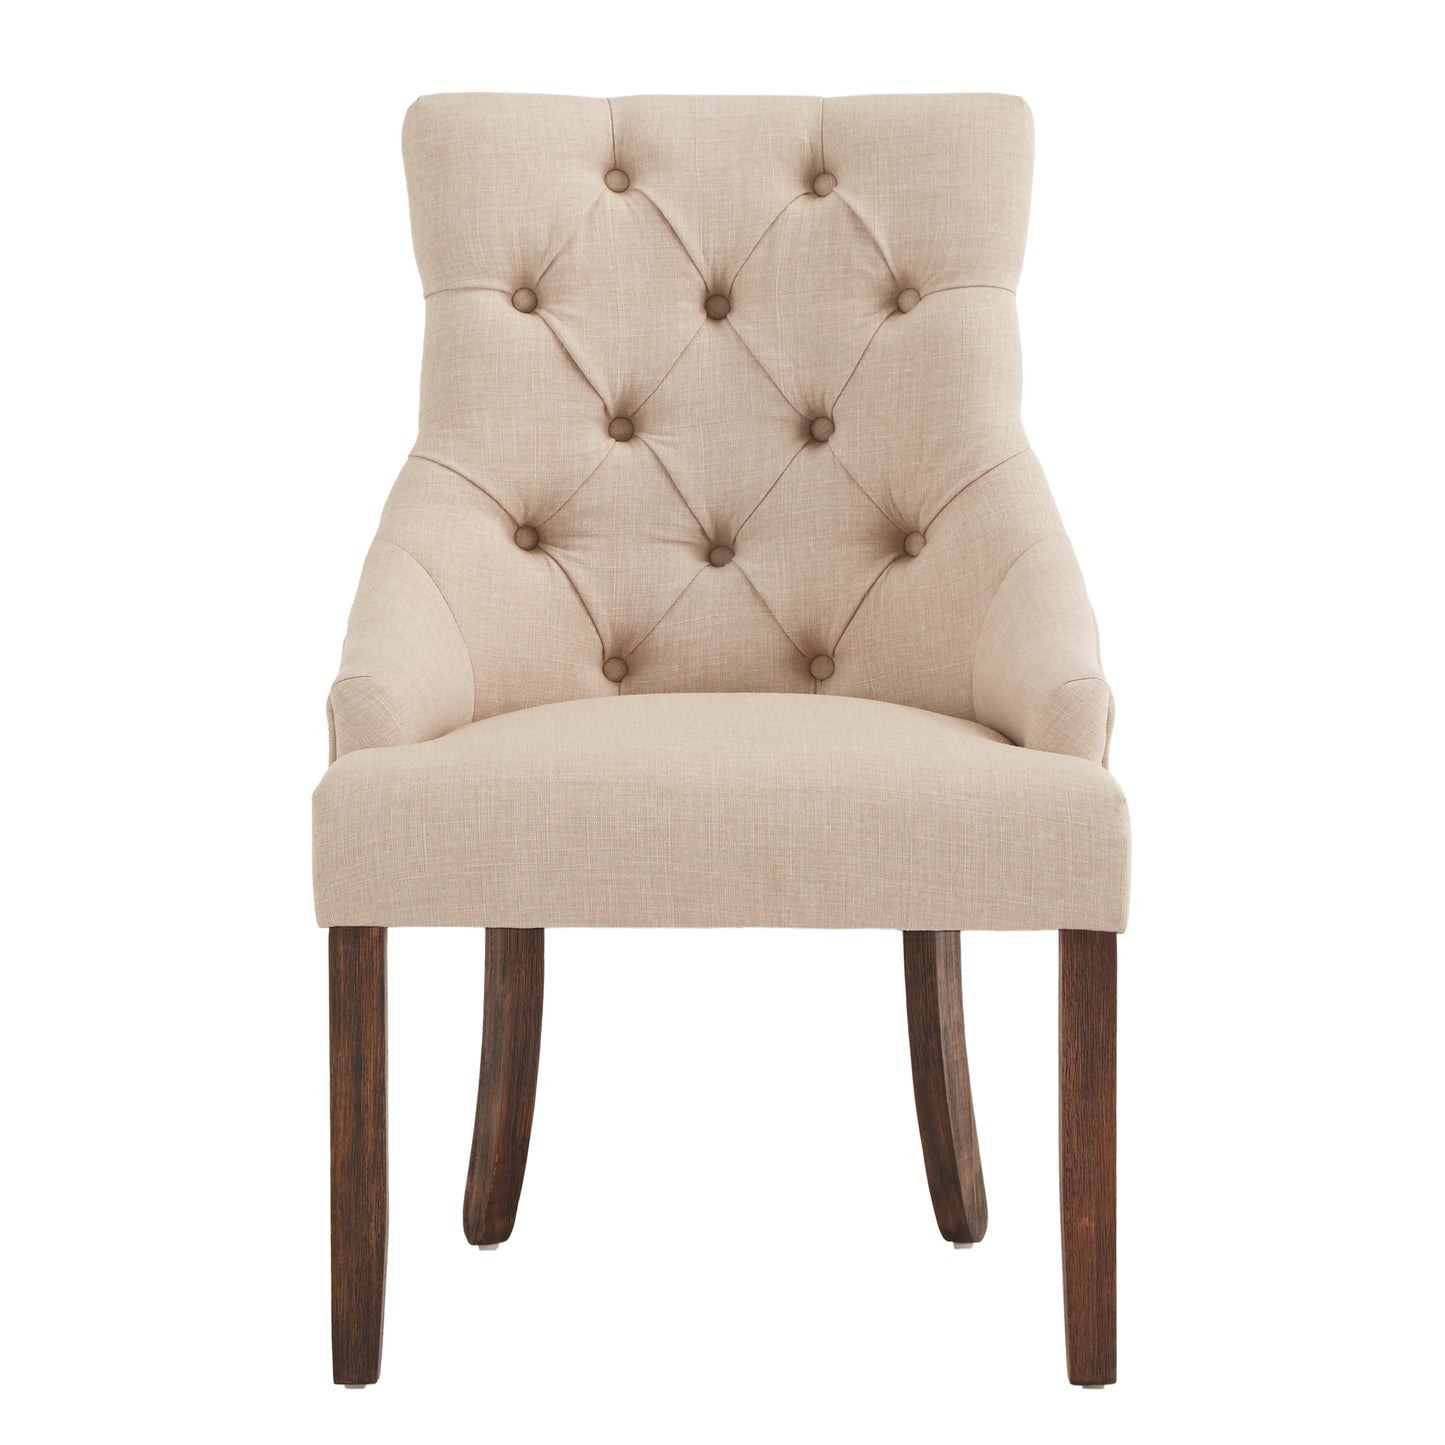 Linen Curved Back Tufted Dining Chairs (Set of 2) - Beige Linen